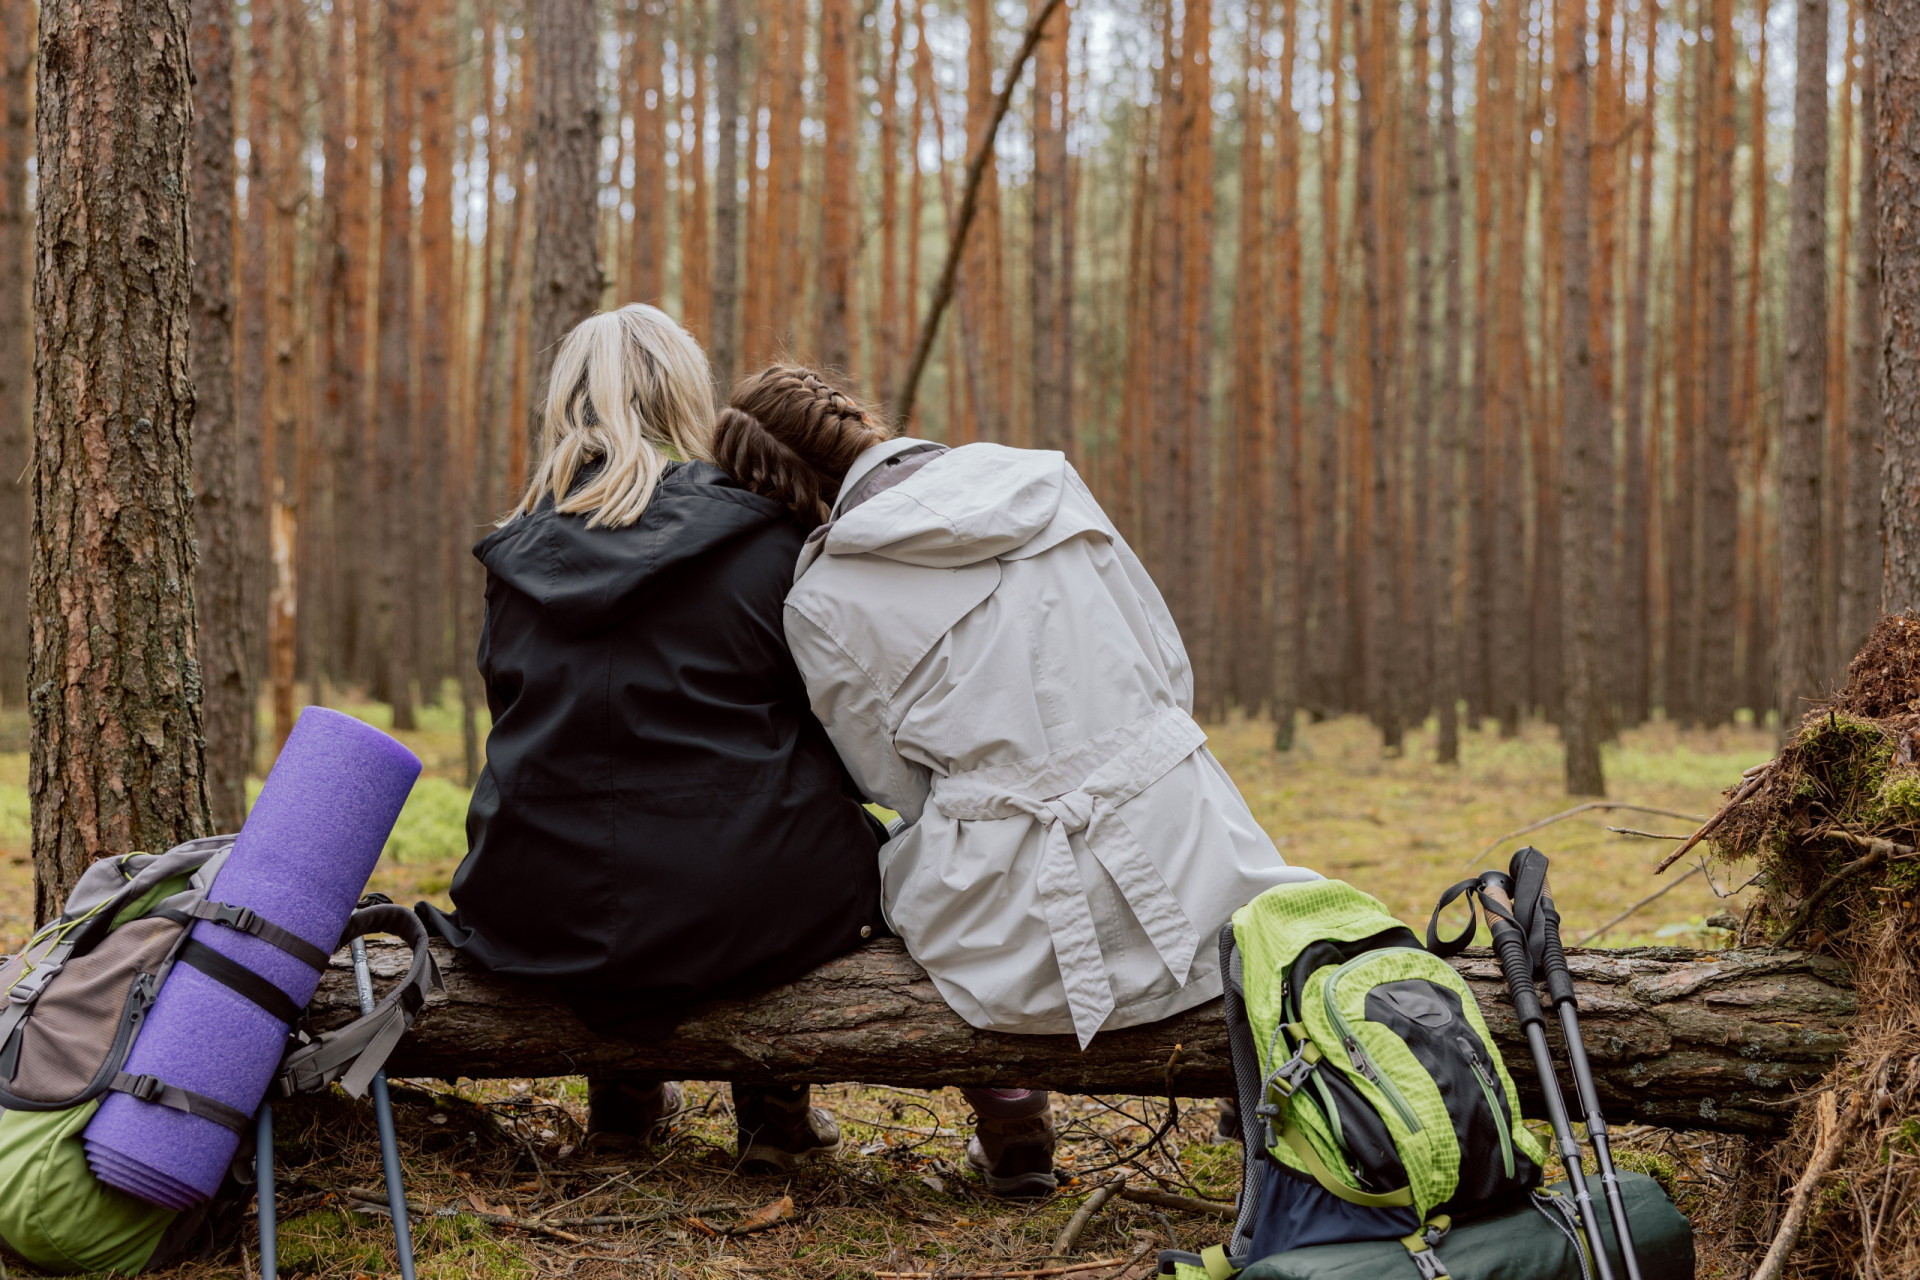 <p>Enjoy some mom time in the wilderness this year. If she loves to camp, take the time to organize things to make it easy for her to simply come with you and not have to stress about logistics and so on.</p><p>You may also like:<a href="https://www.starsinsider.com/n/378068?utm_source=msn.com&utm_medium=display&utm_campaign=referral_description&utm_content=708861en-us"> These are the sexiest nations around the world, illustrated by celebs</a></p>